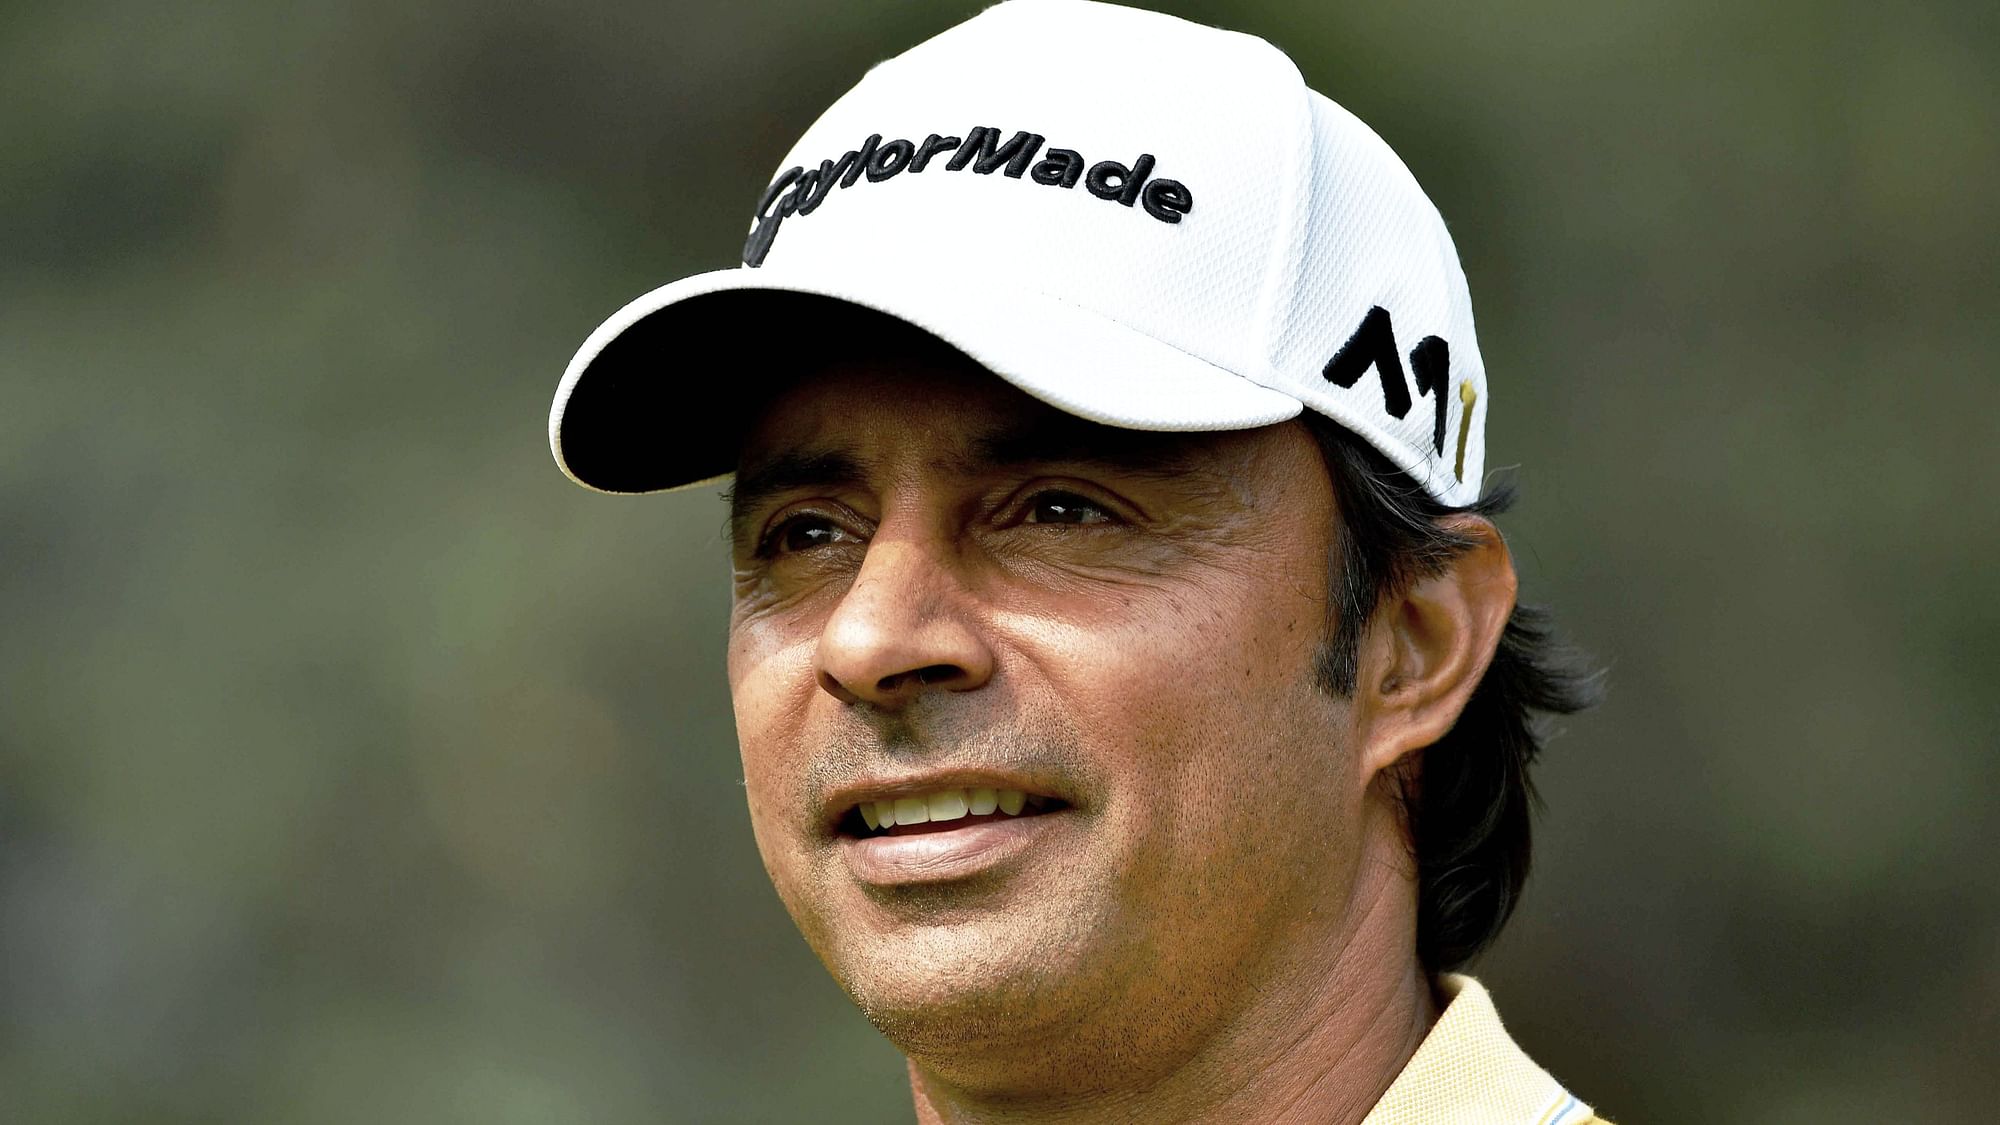 File picture of Indian golfer Jyoti Randhawa, who was arrested on poaching charges in Uttar Pradesh on 26 December.